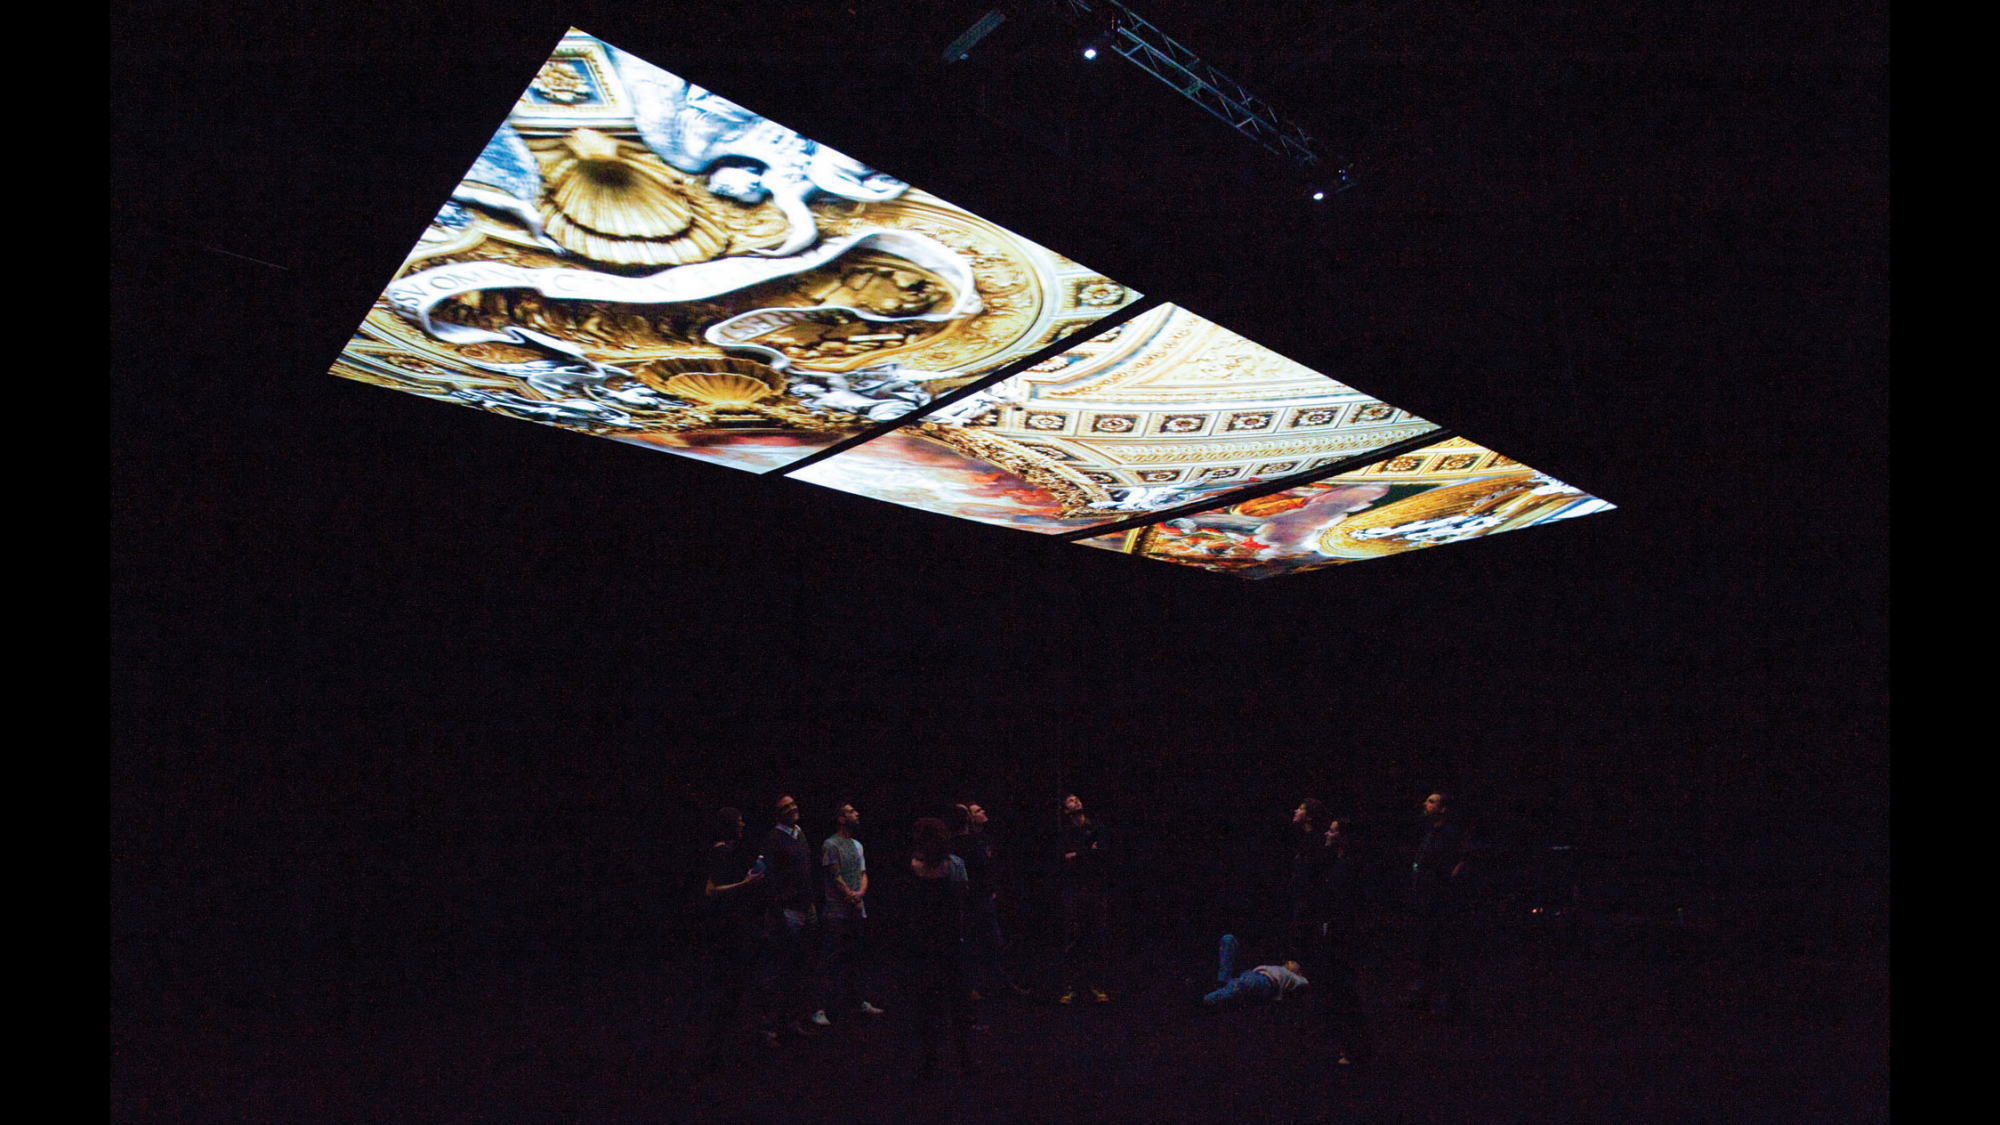 Three screens showing images of an ornate palace ceiling suspended form the ceiling of a dark room as a small crowd looks up.